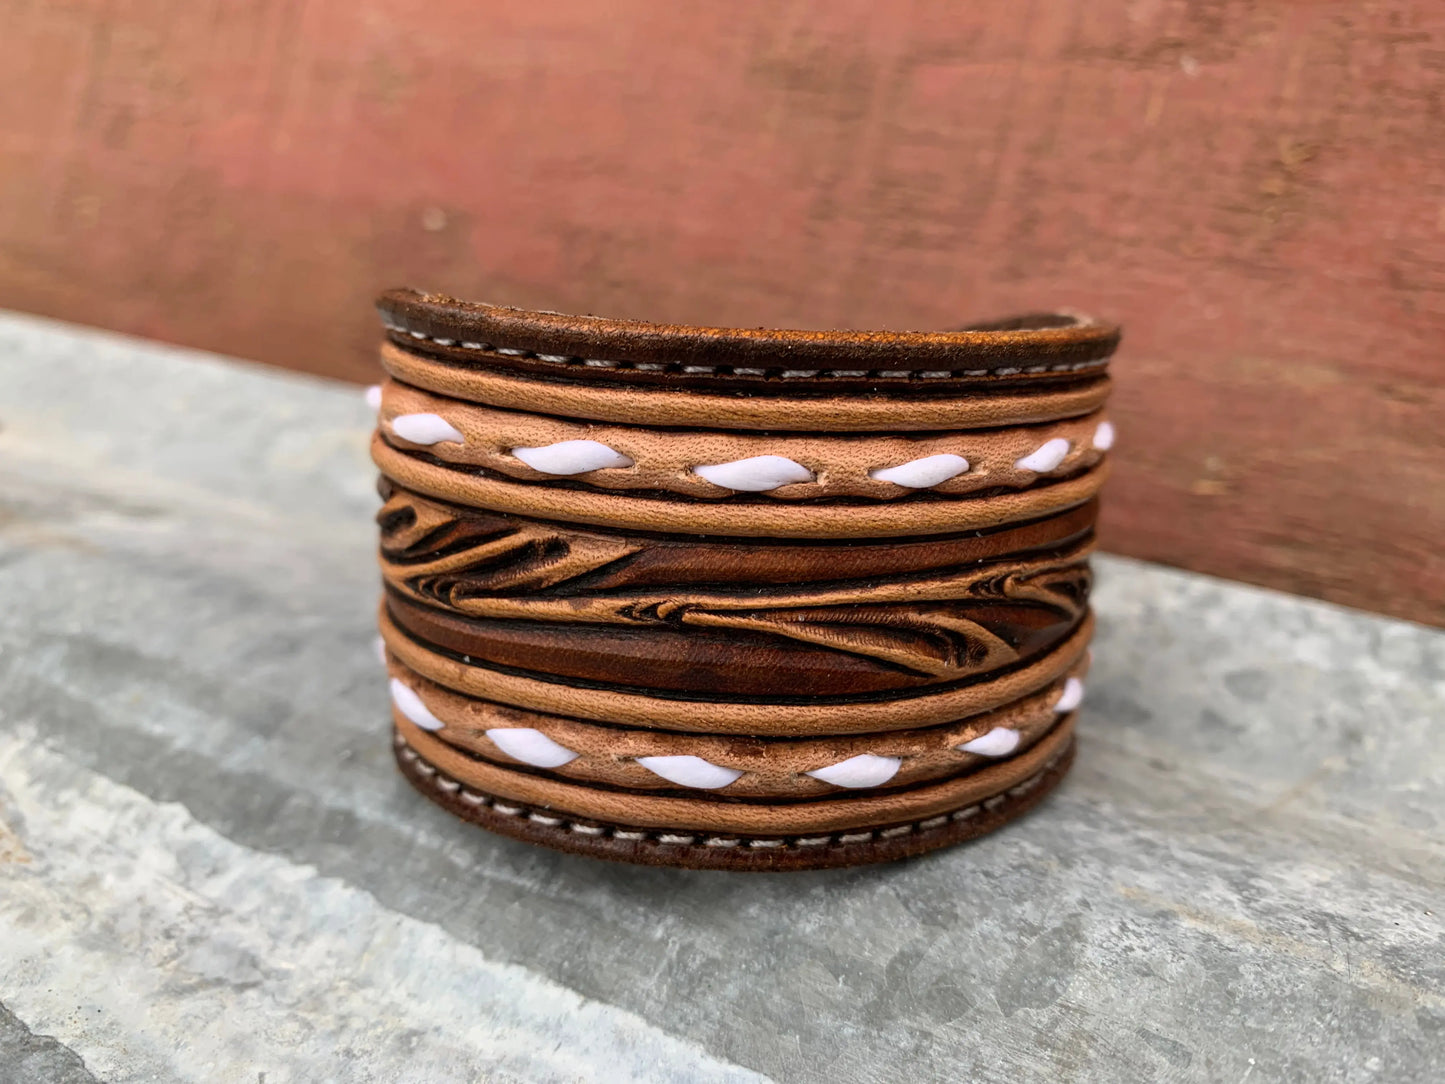 The Vear Hand Tooled leather Cuff Bracelet with Buckstitching The Rodeo Rose